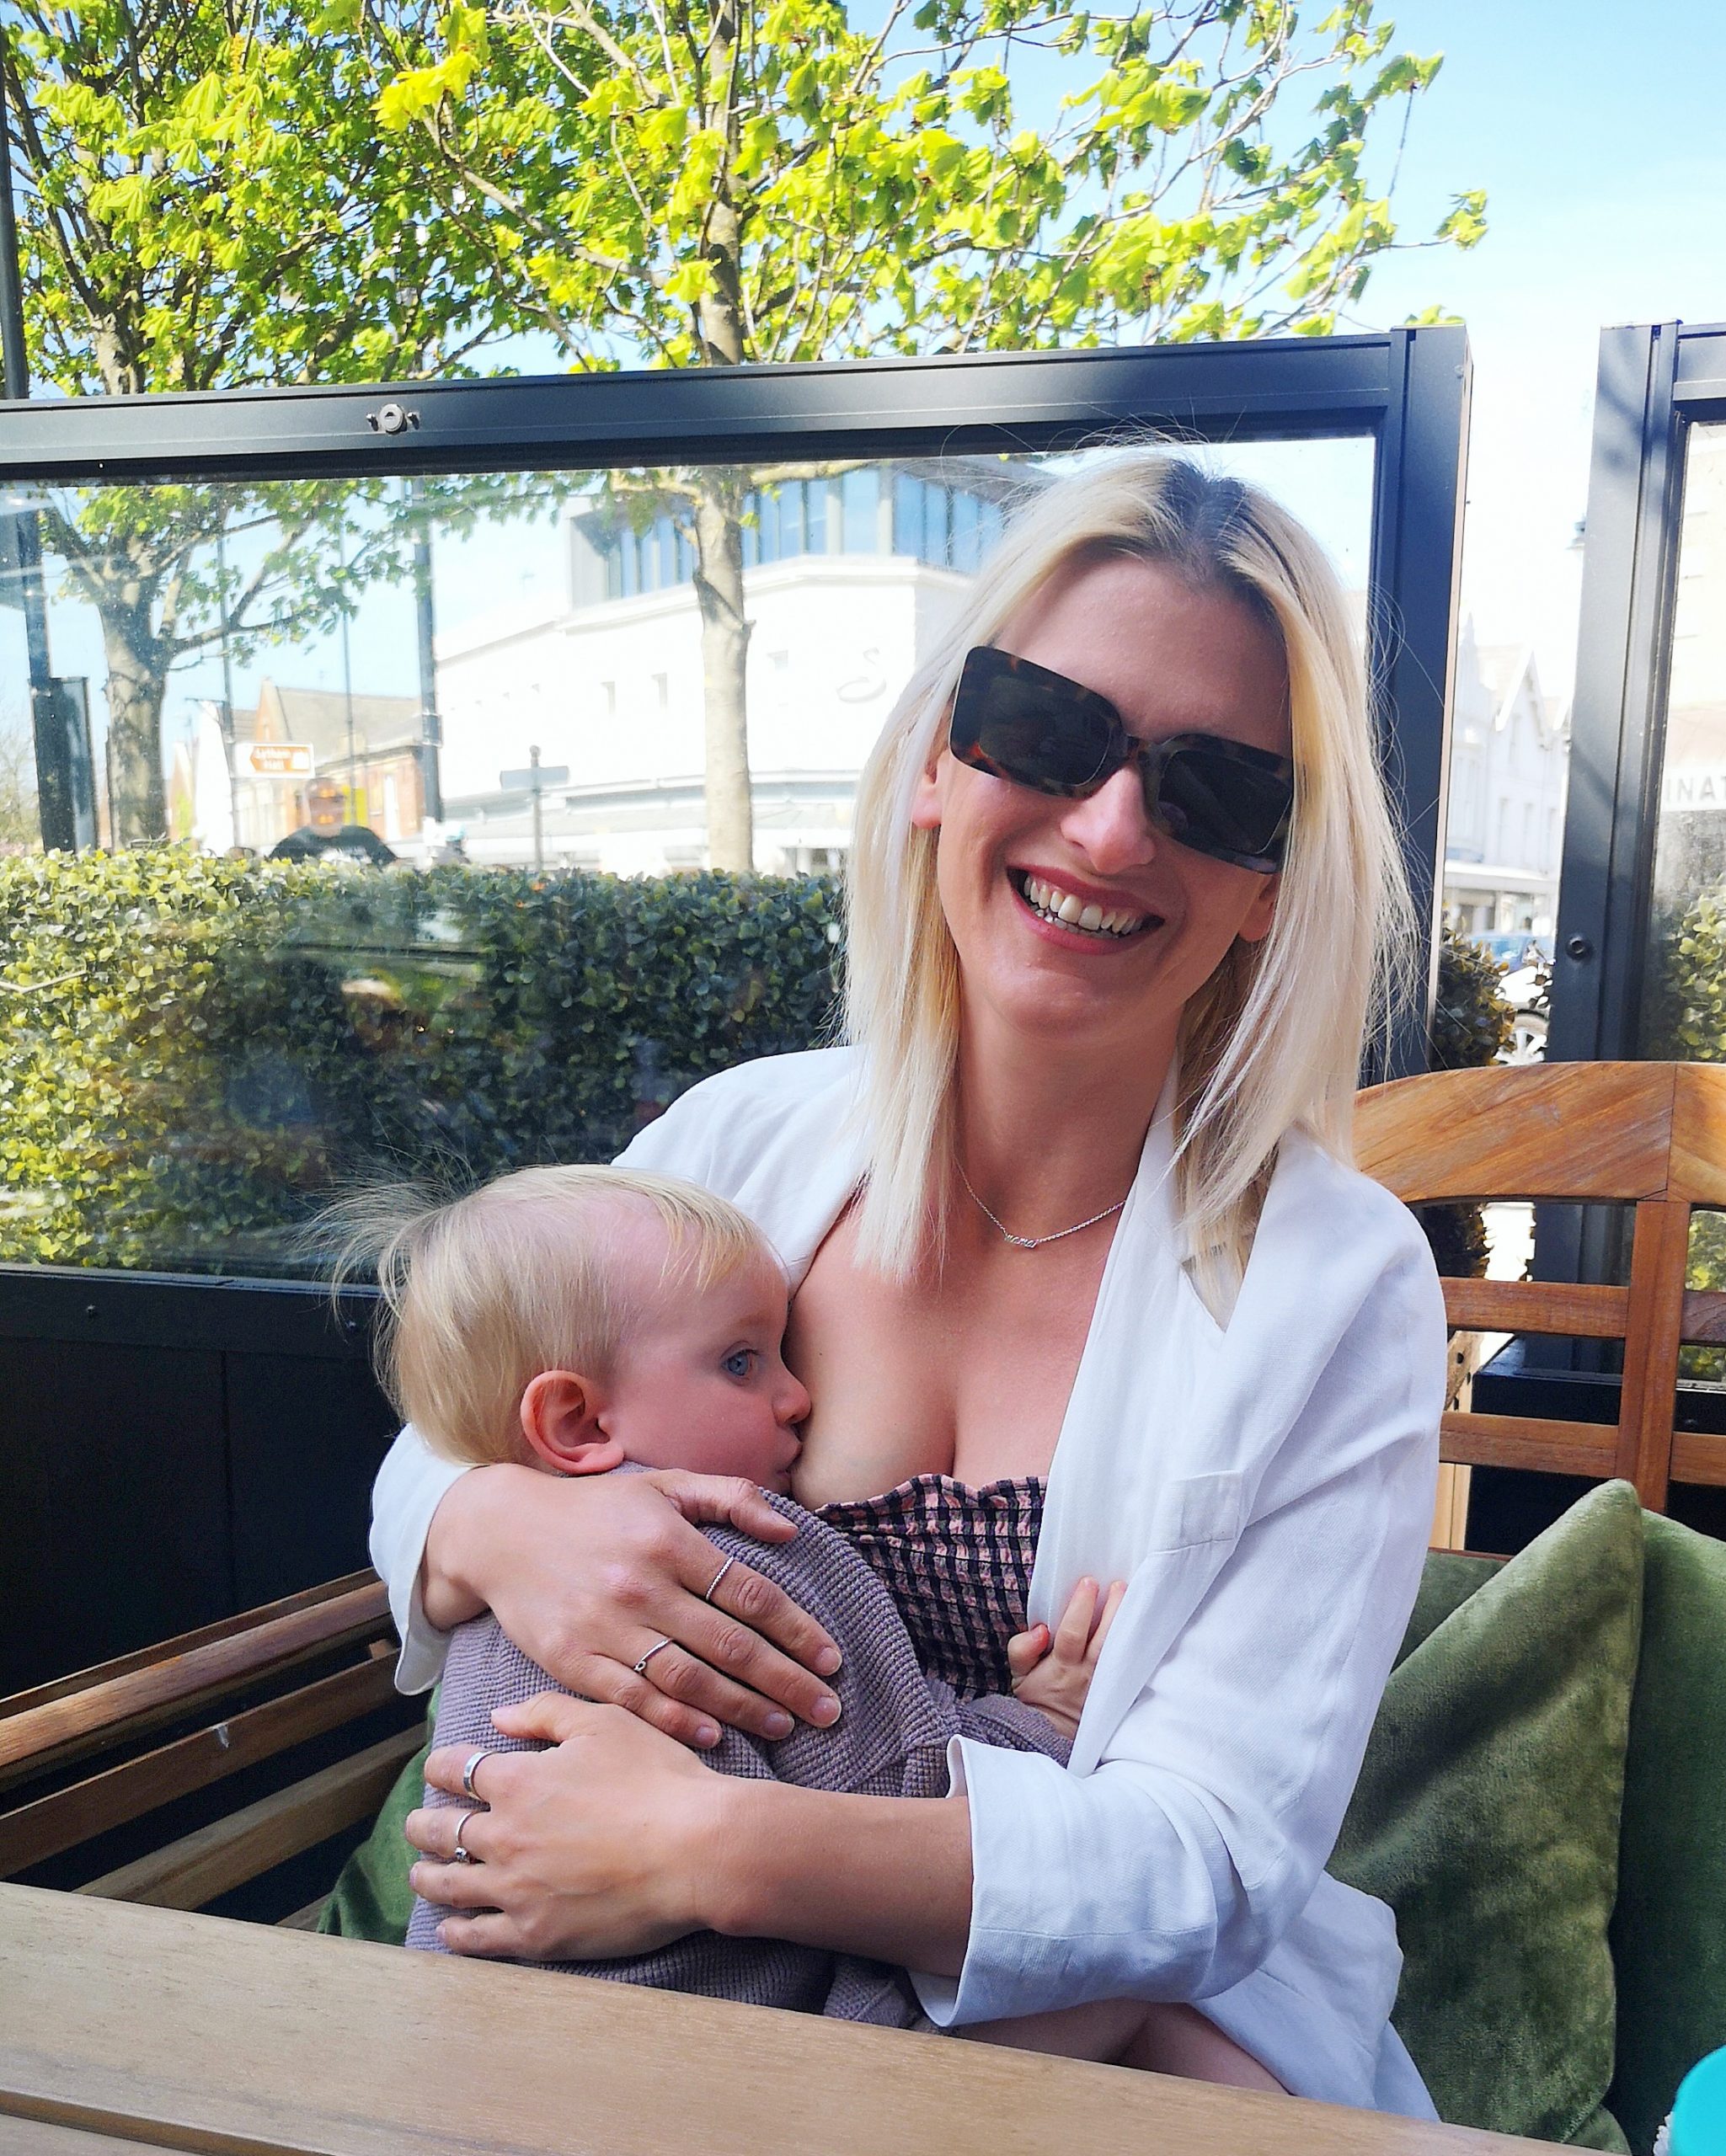 Breastfeeding a toddler outdoors